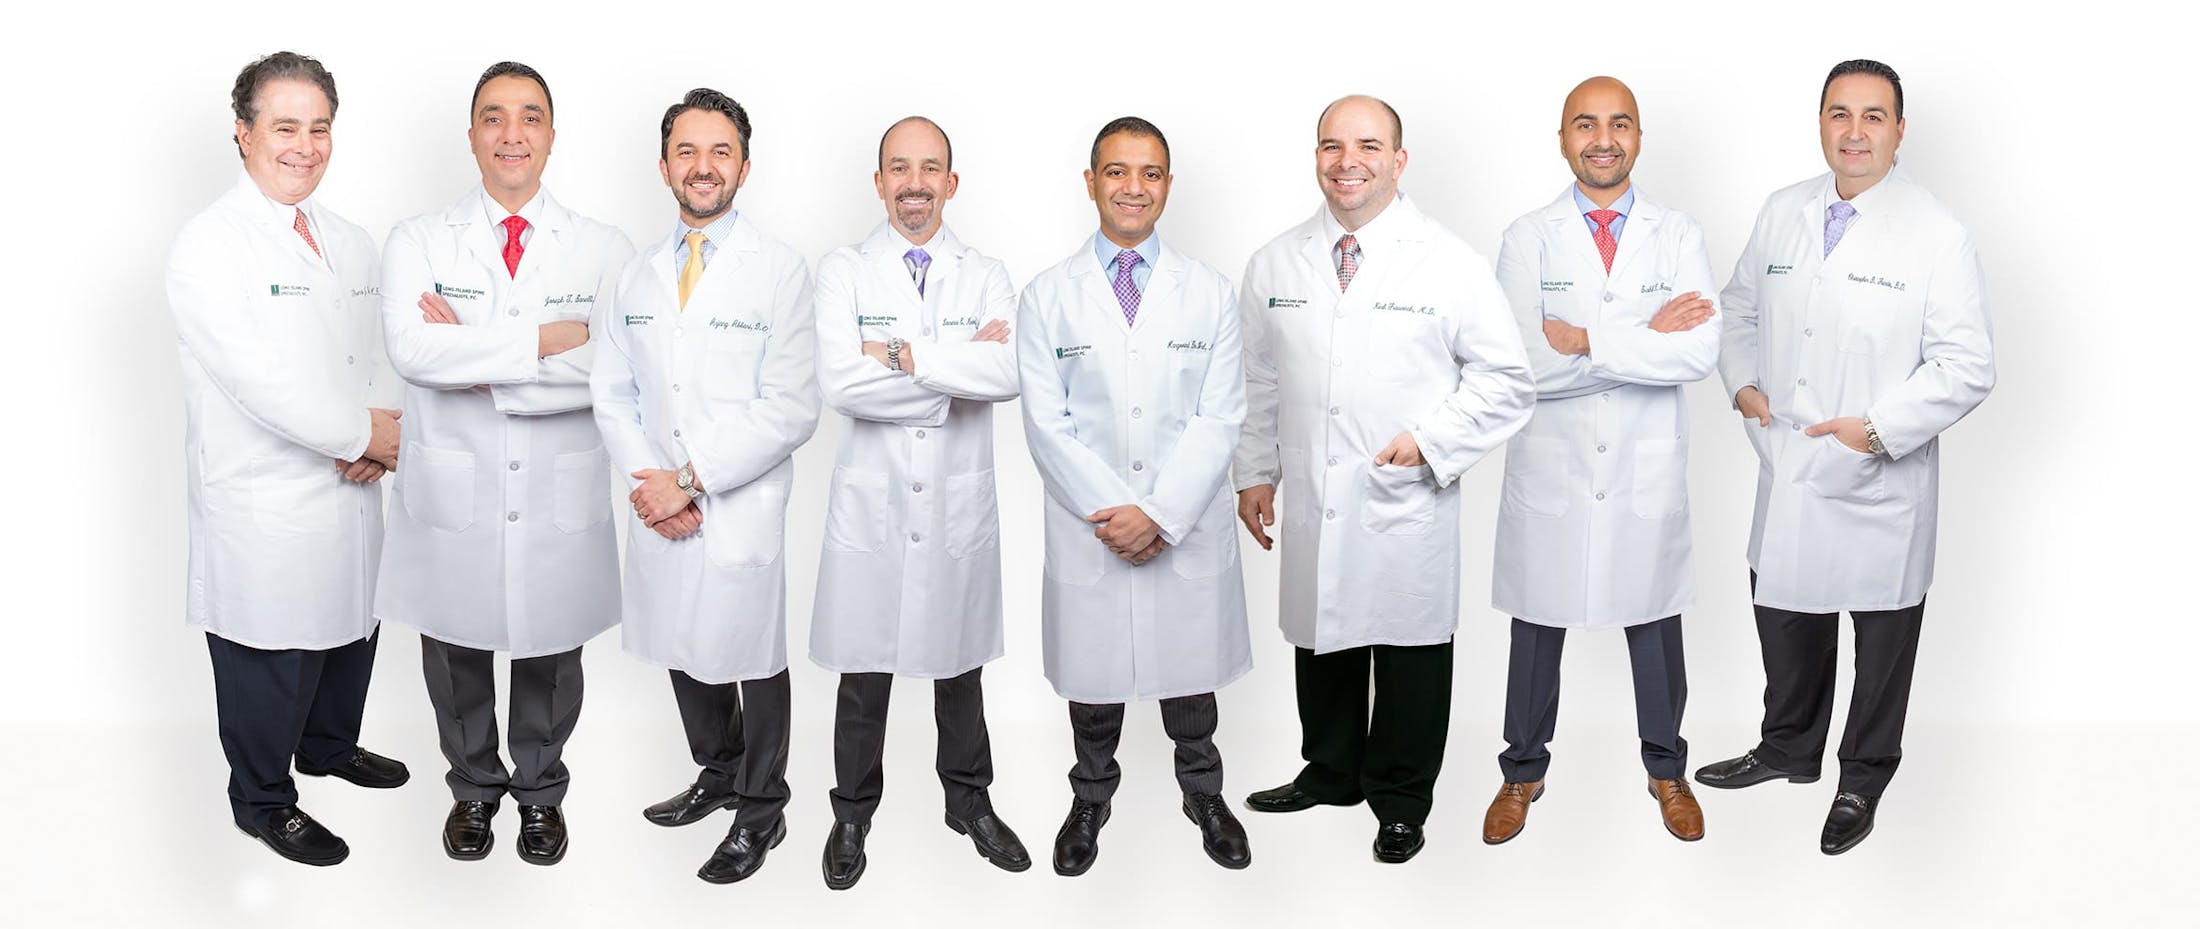 A group photo of 8 doctors